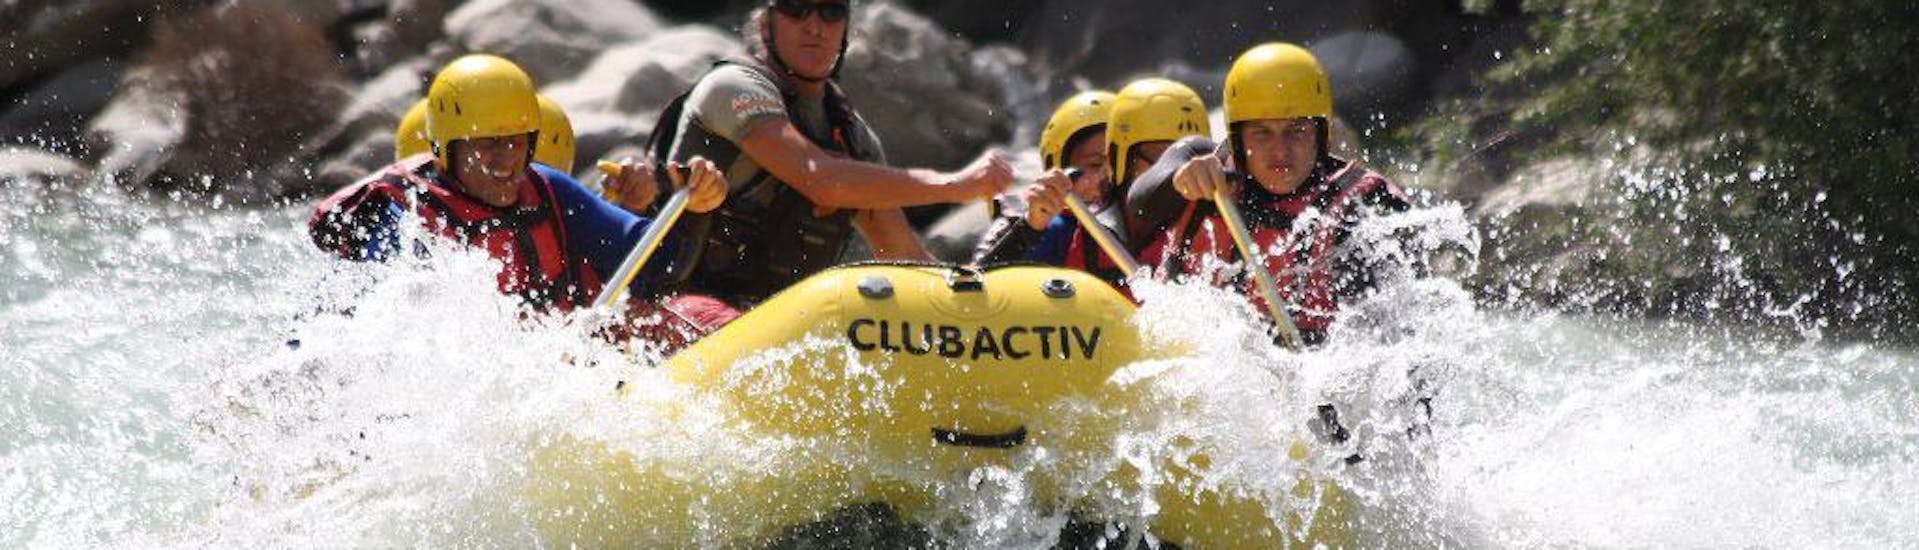 Concentrated people during the Rafting on the Isarco - Short Tour with Club Activ.